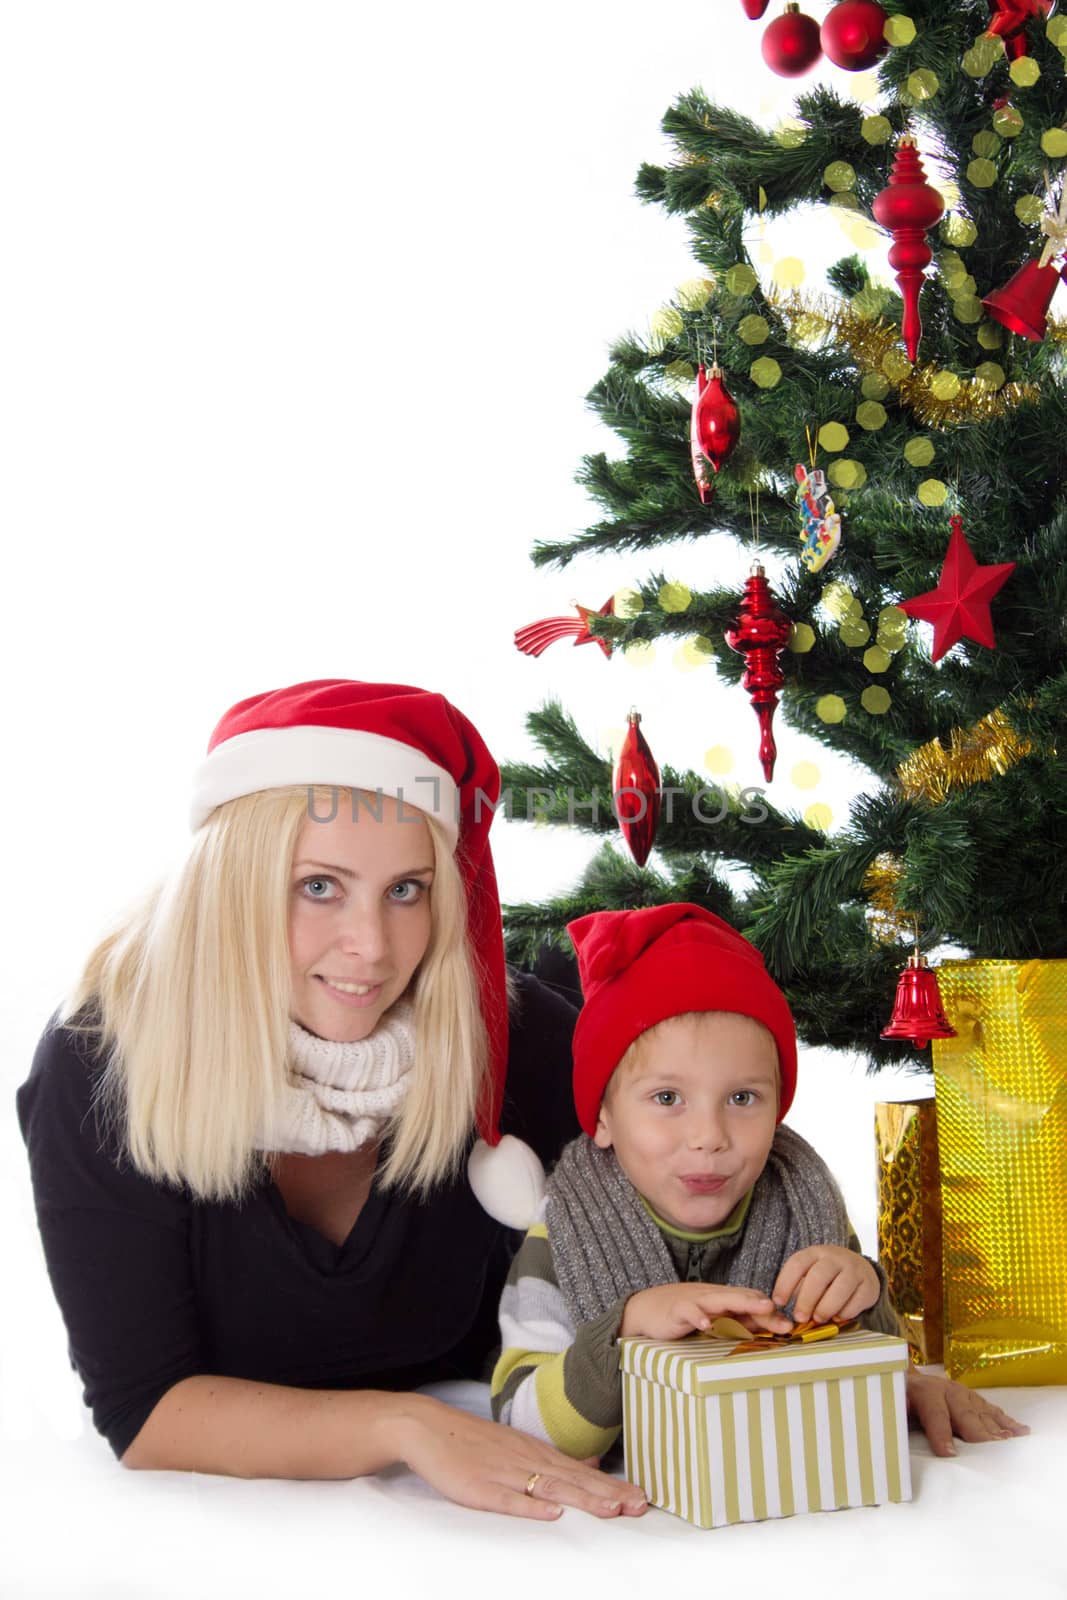 Mother and son lying under Christmas tree by Angel_a